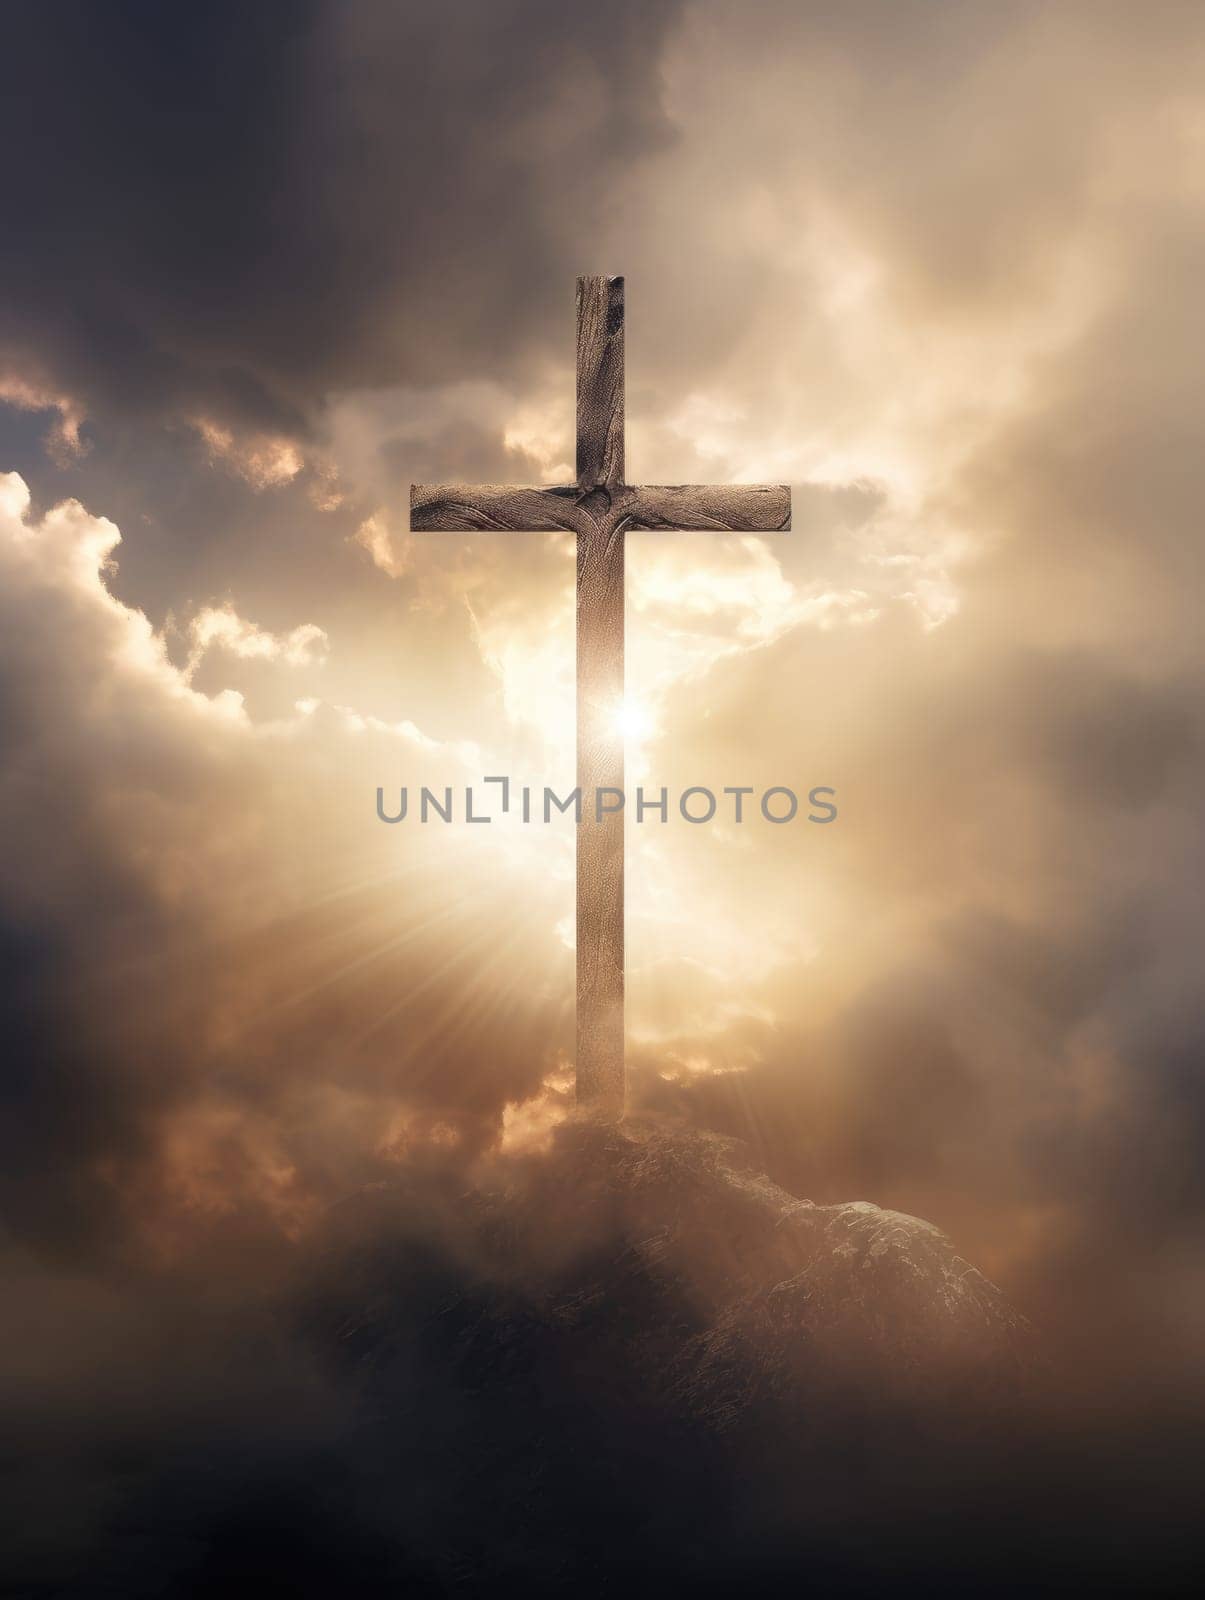 Cross in the clouds radiates the light of faith and hope. Sign of faith.